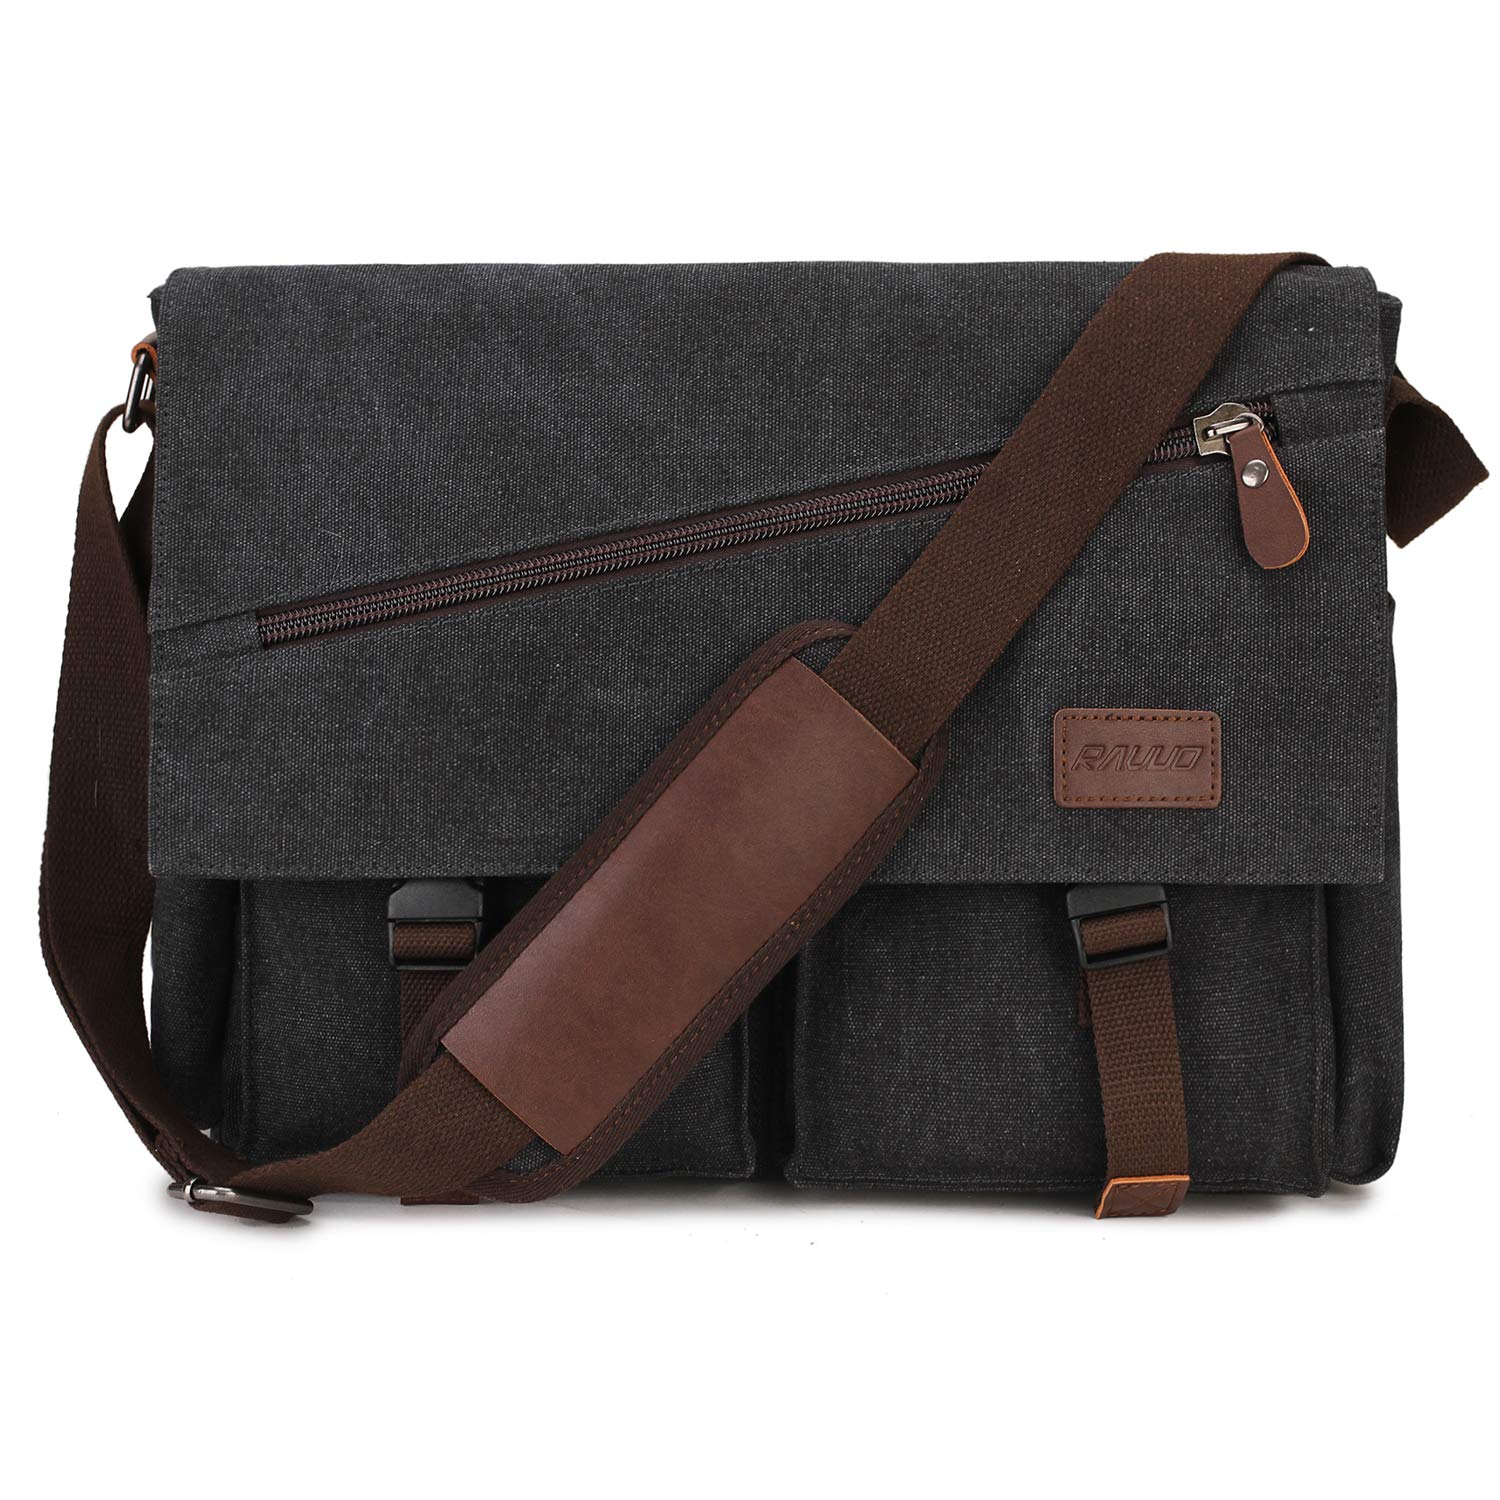 What is a messenger bag?